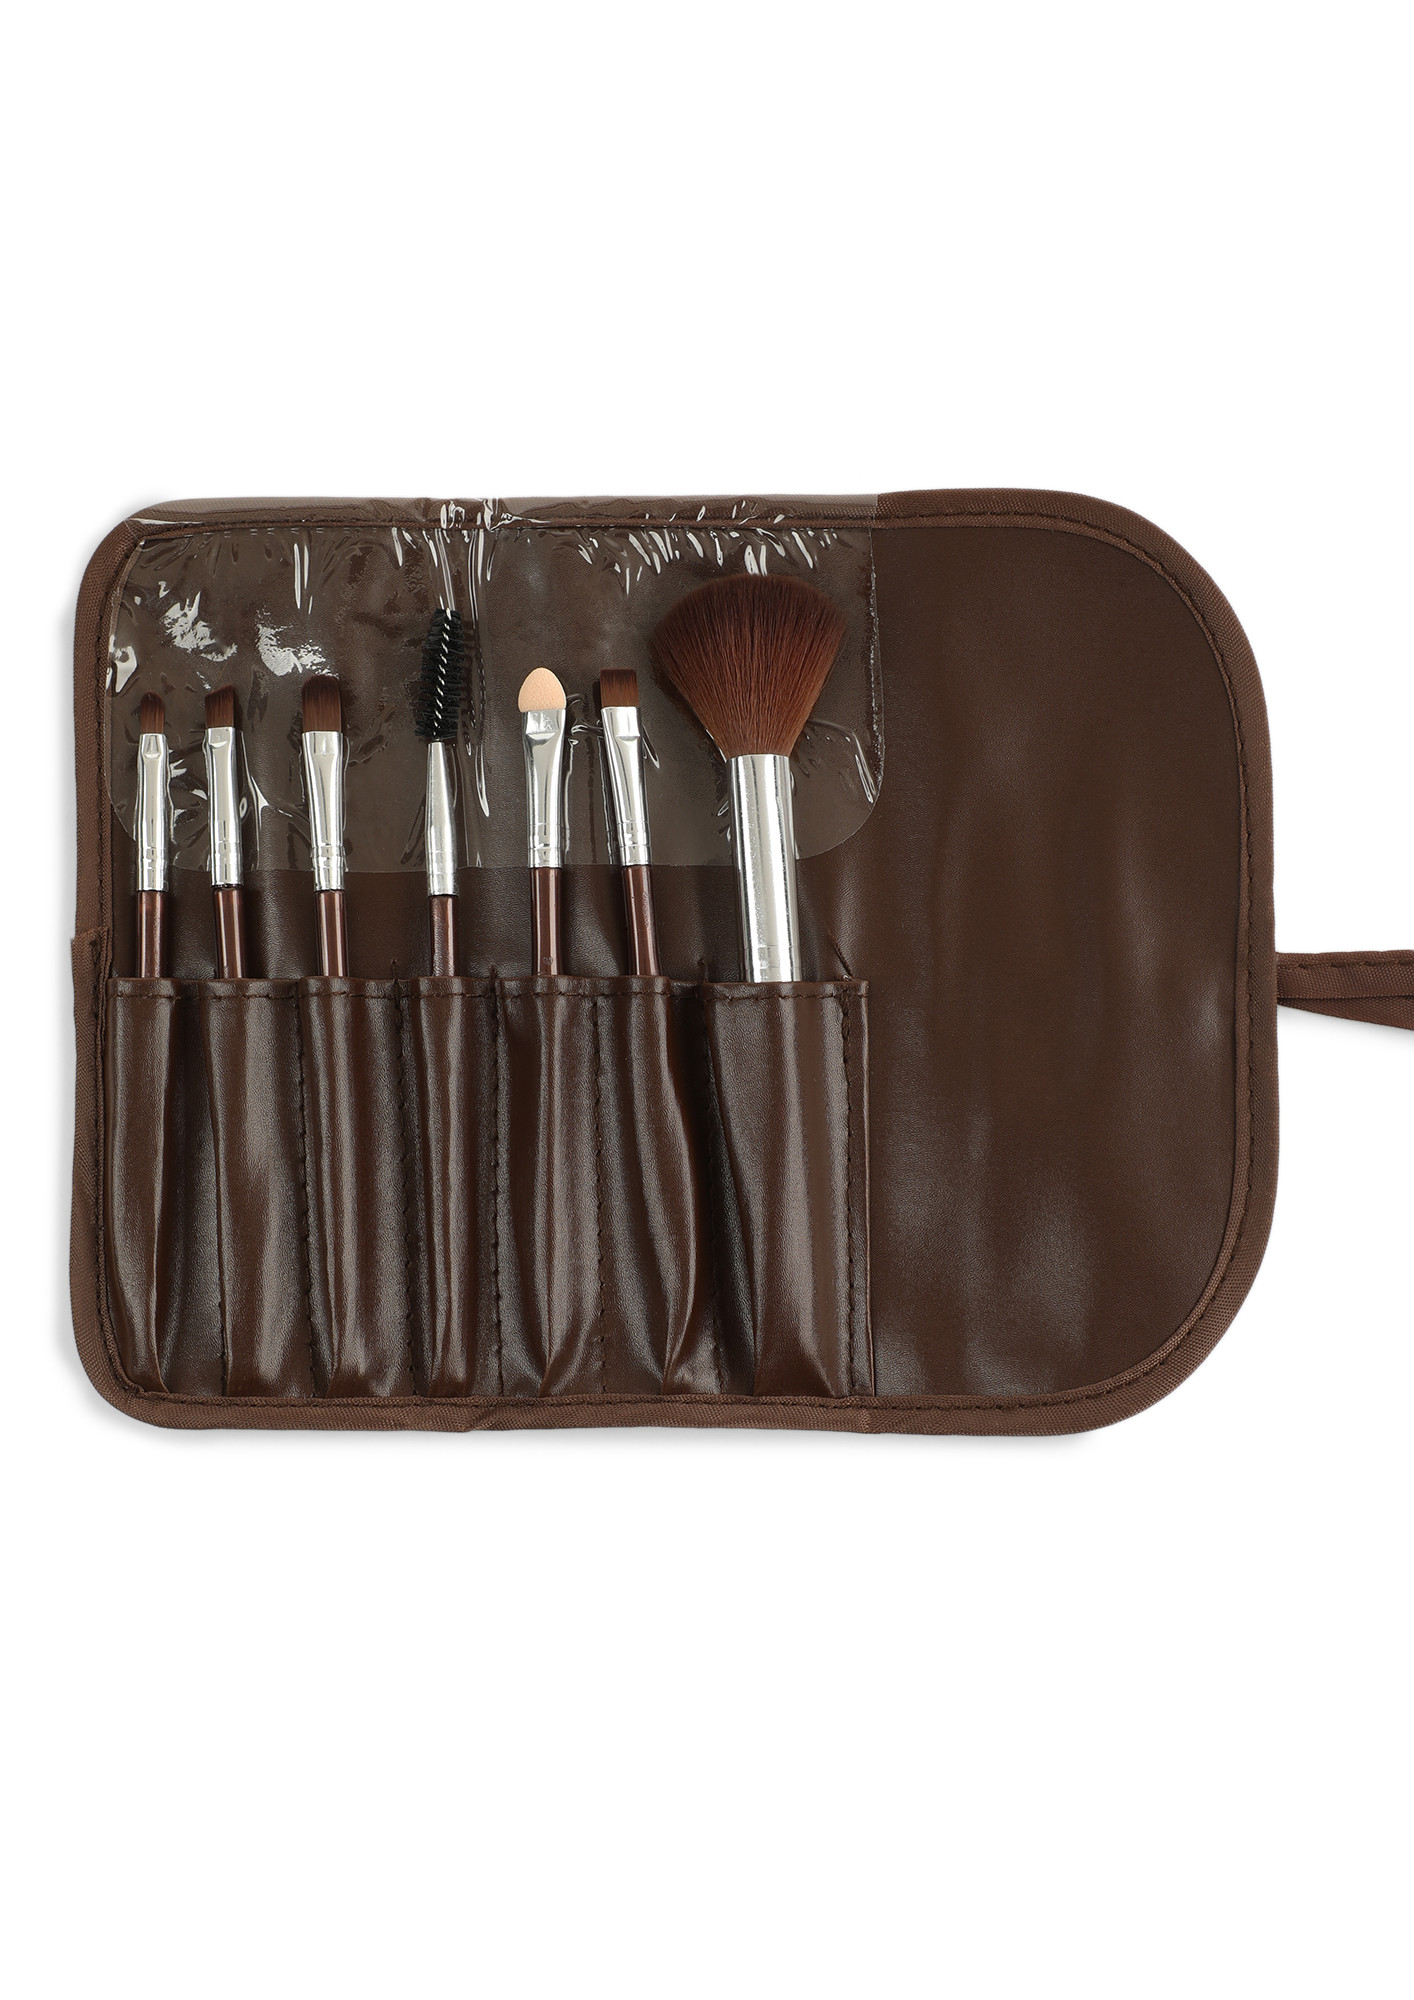 GLAM QUEEN BROWN MAKEUP BRUSHES - SET OF 7